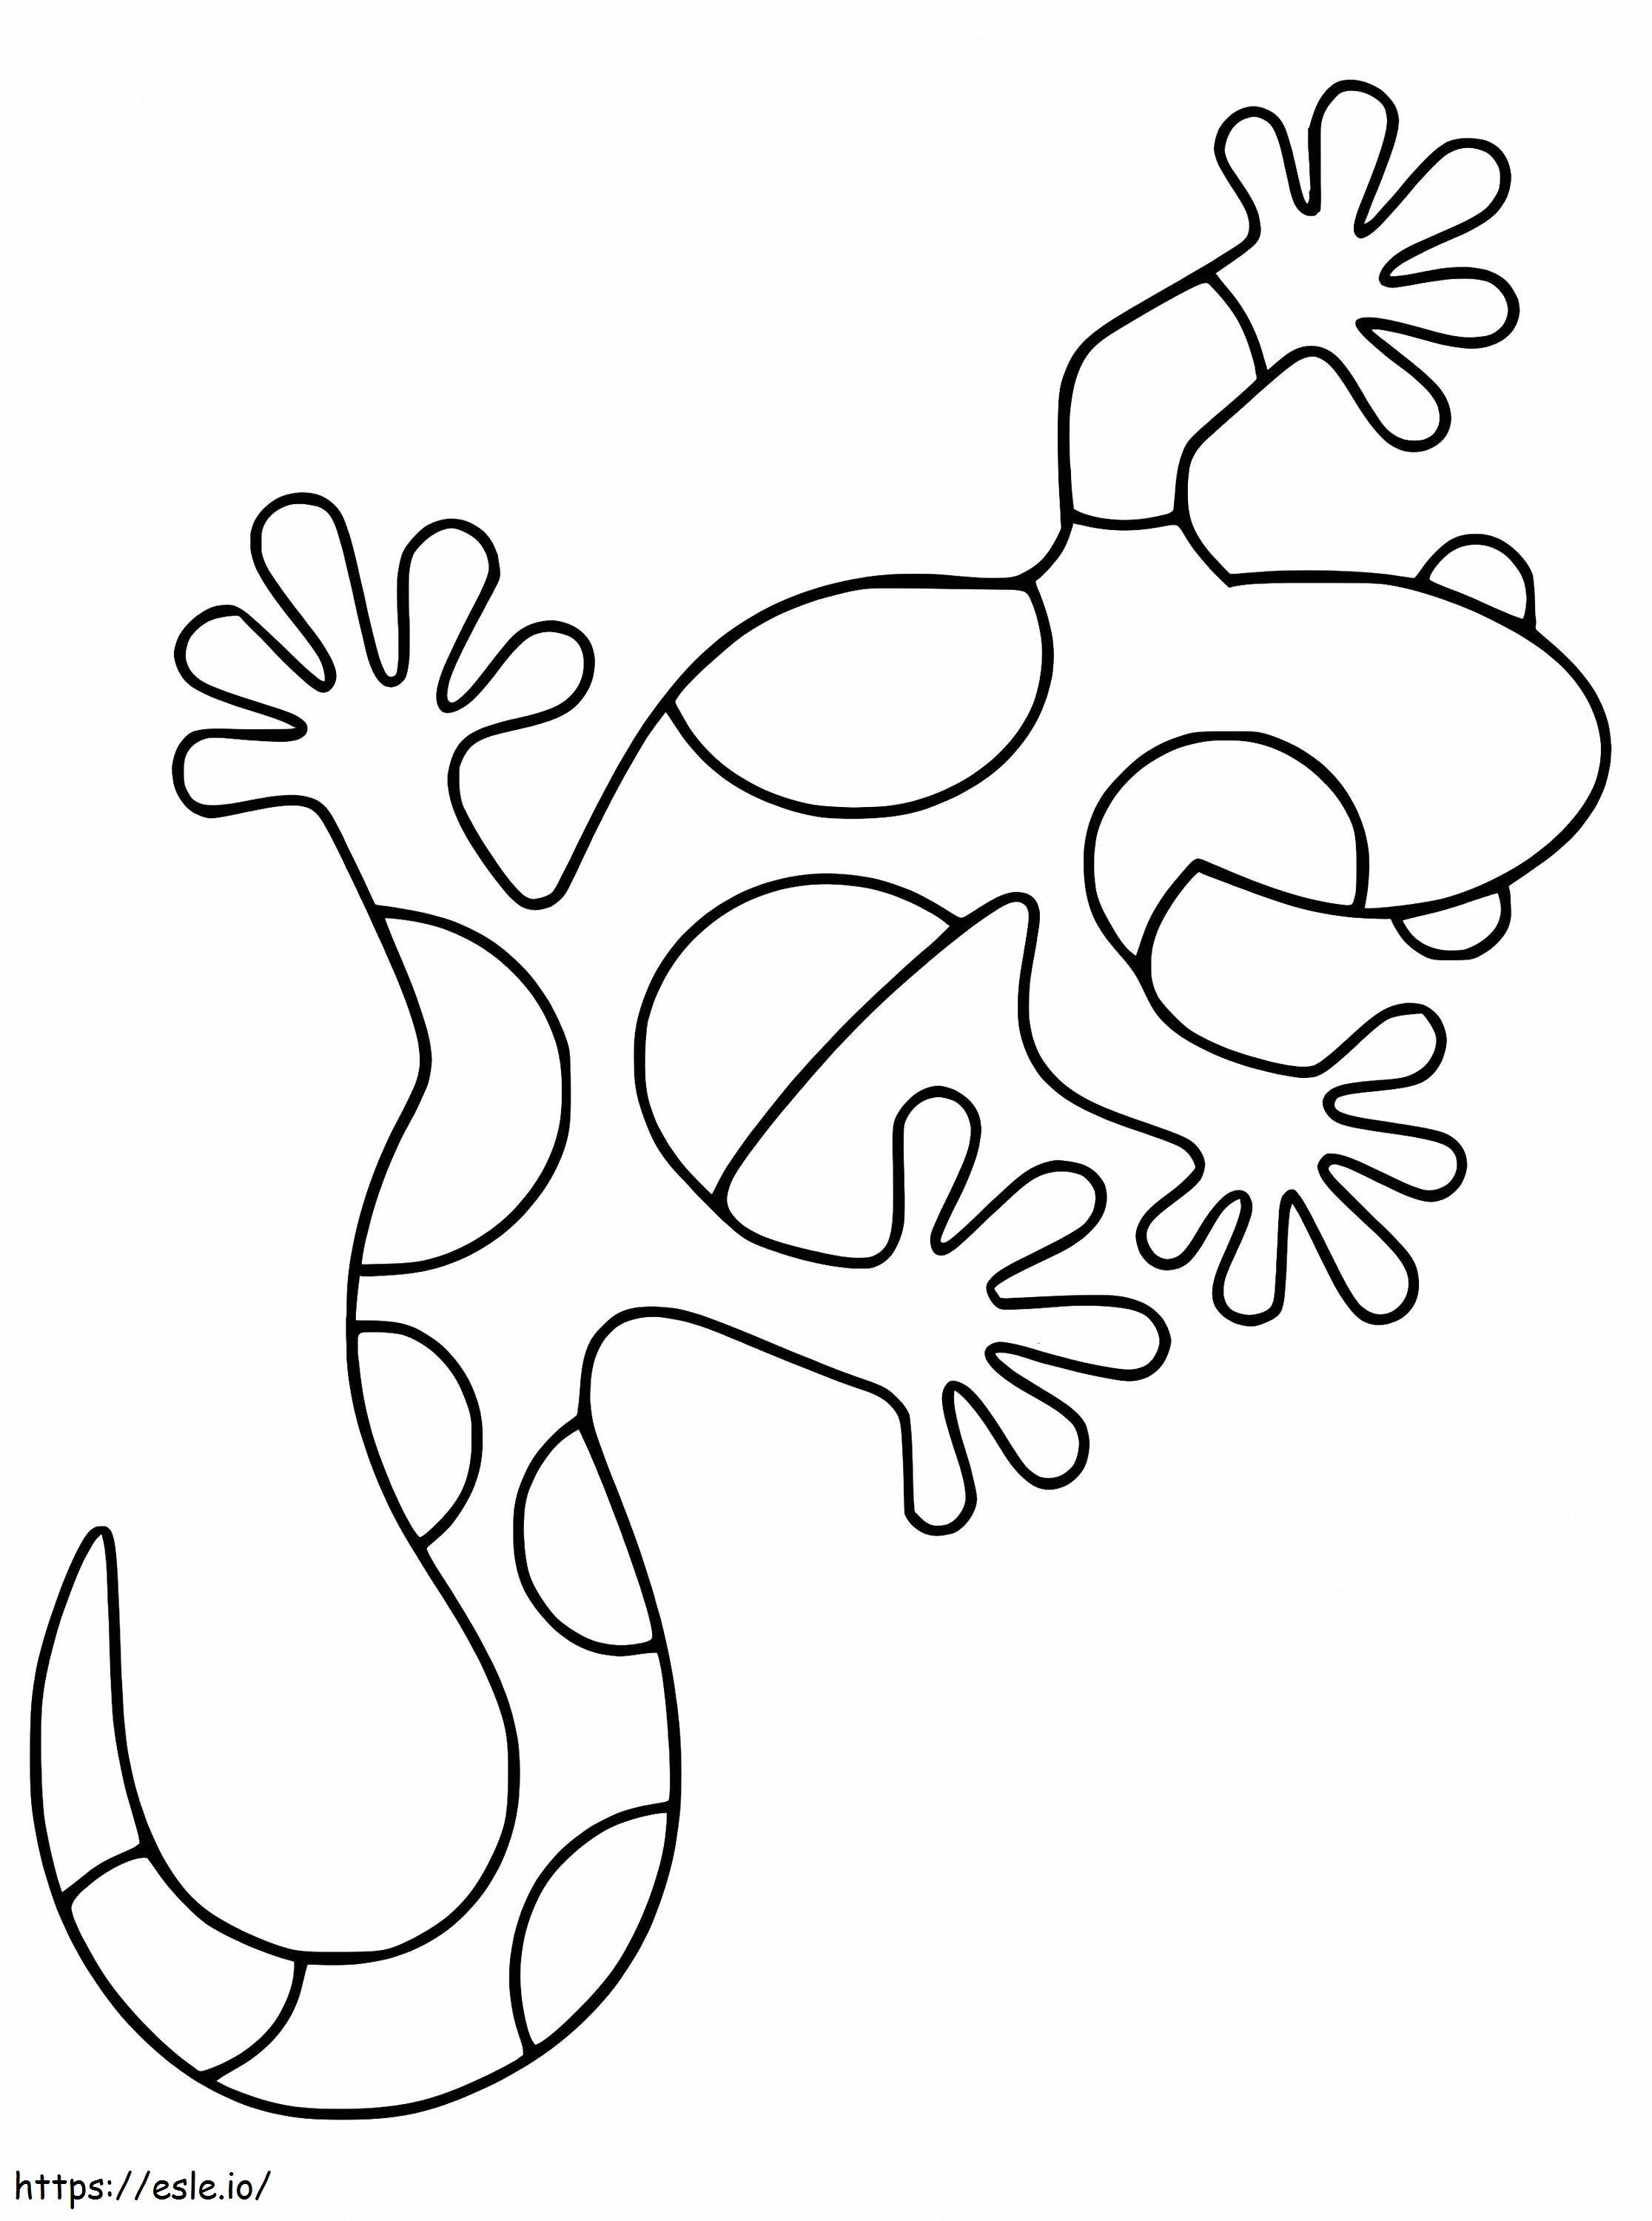 Gecko 5 coloring page